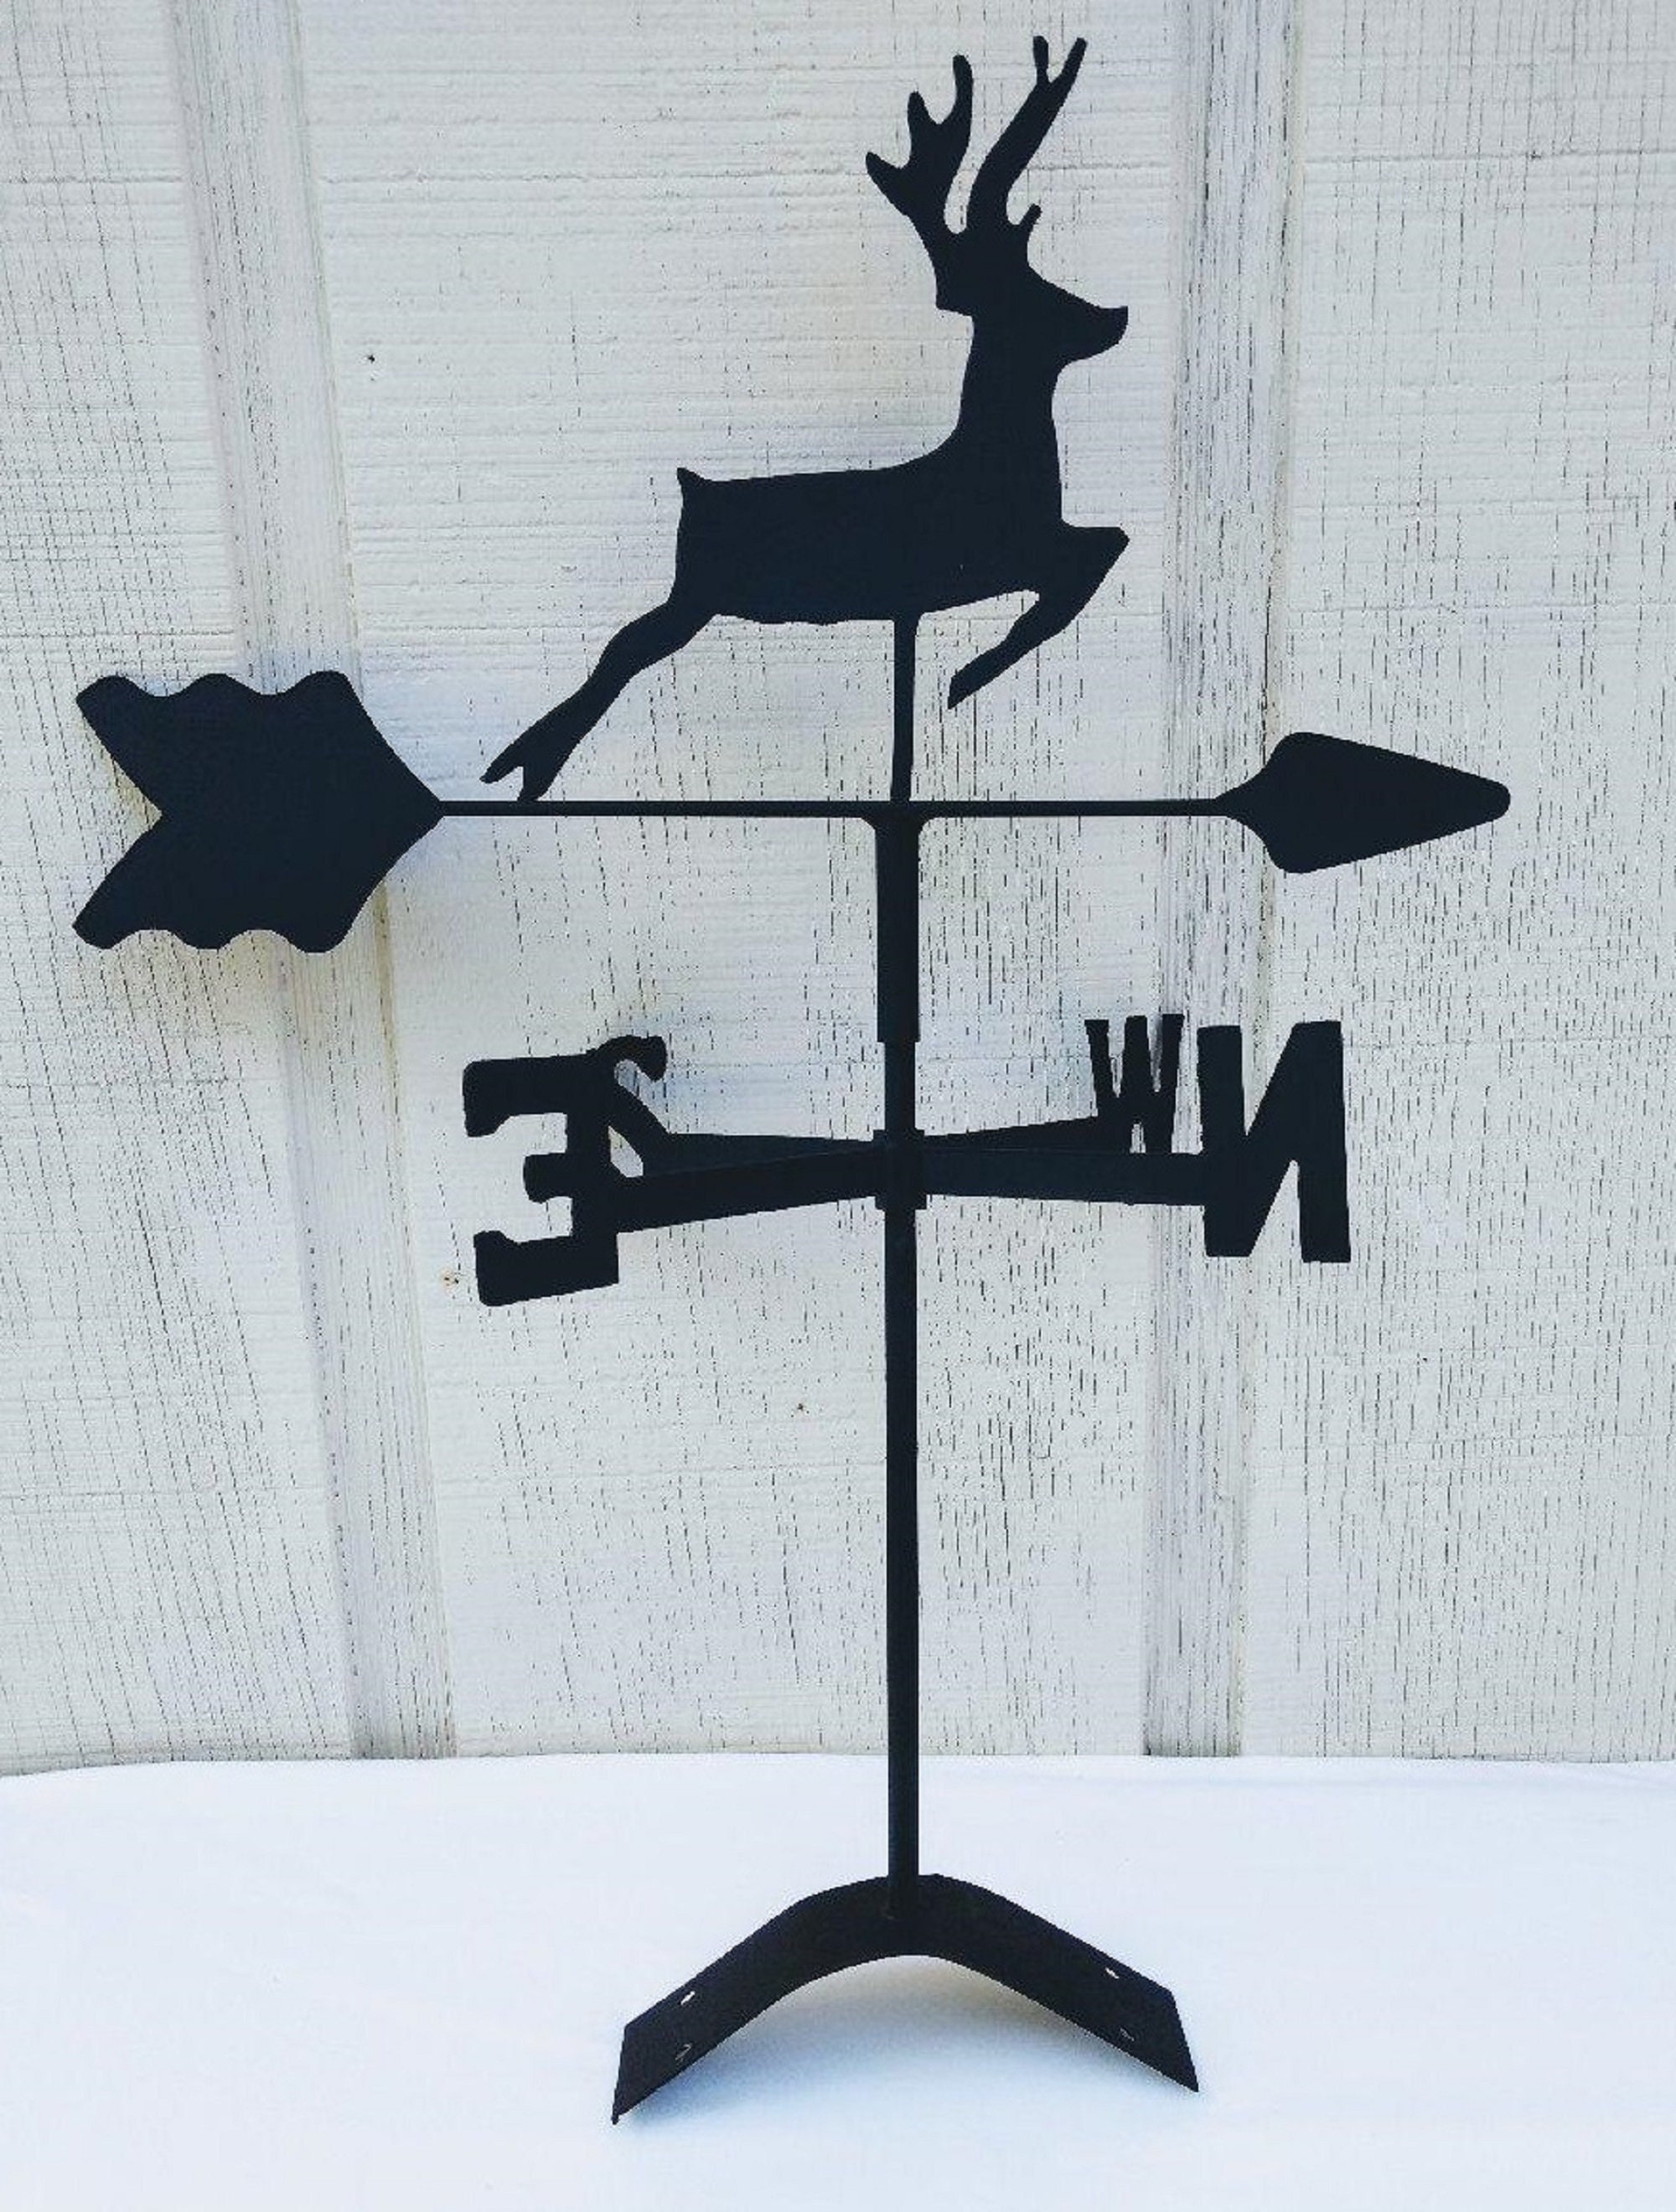 The Lazy Scroll Ground Mount Decorative Black Wrought Iron Look